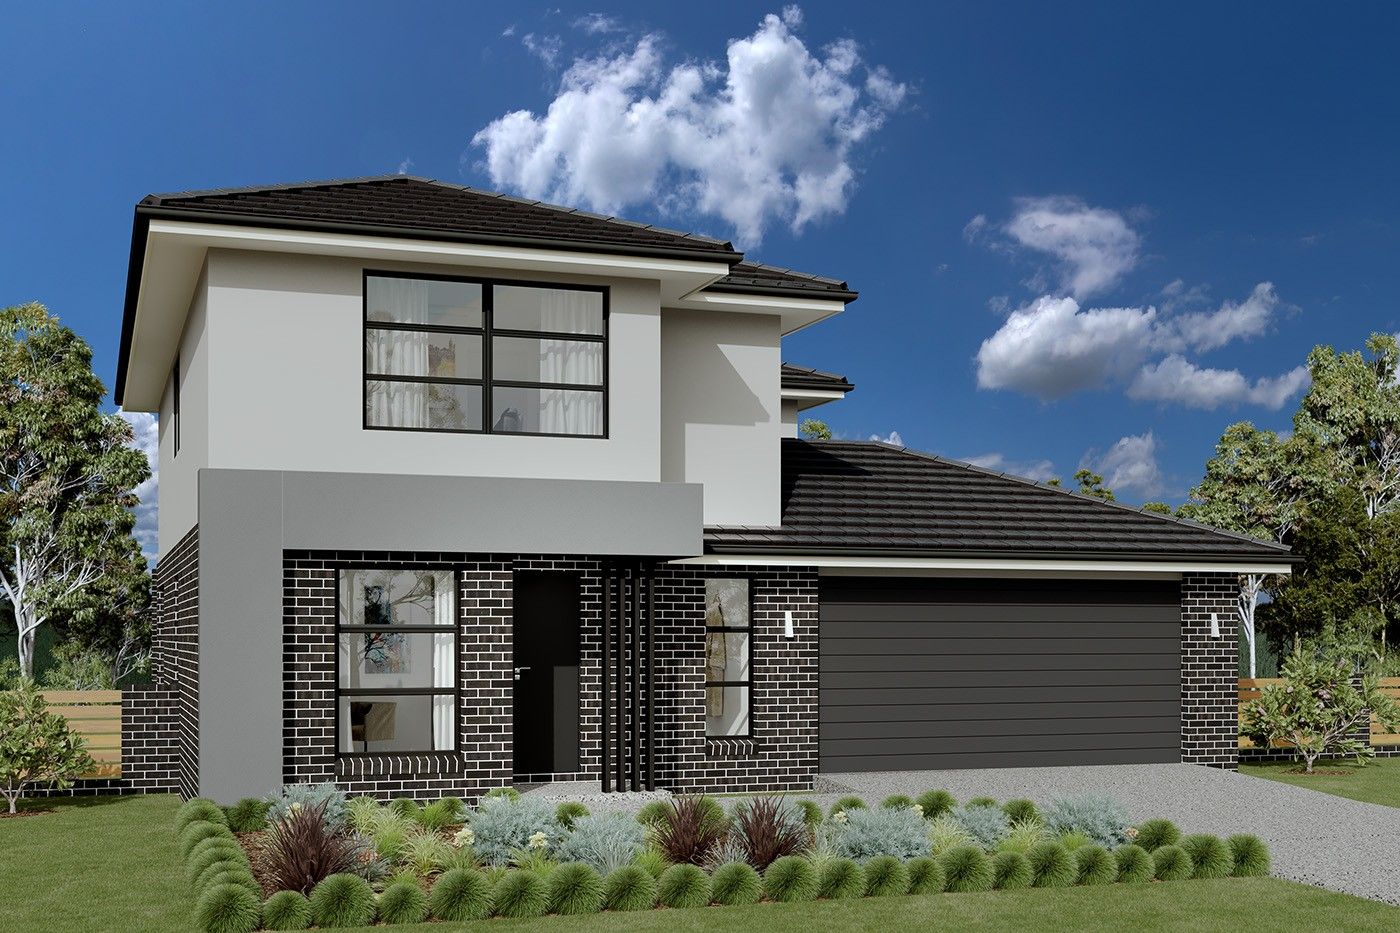 4 bedrooms New House & Land in XXX YOUR STREET BELMONT VIC, 3216